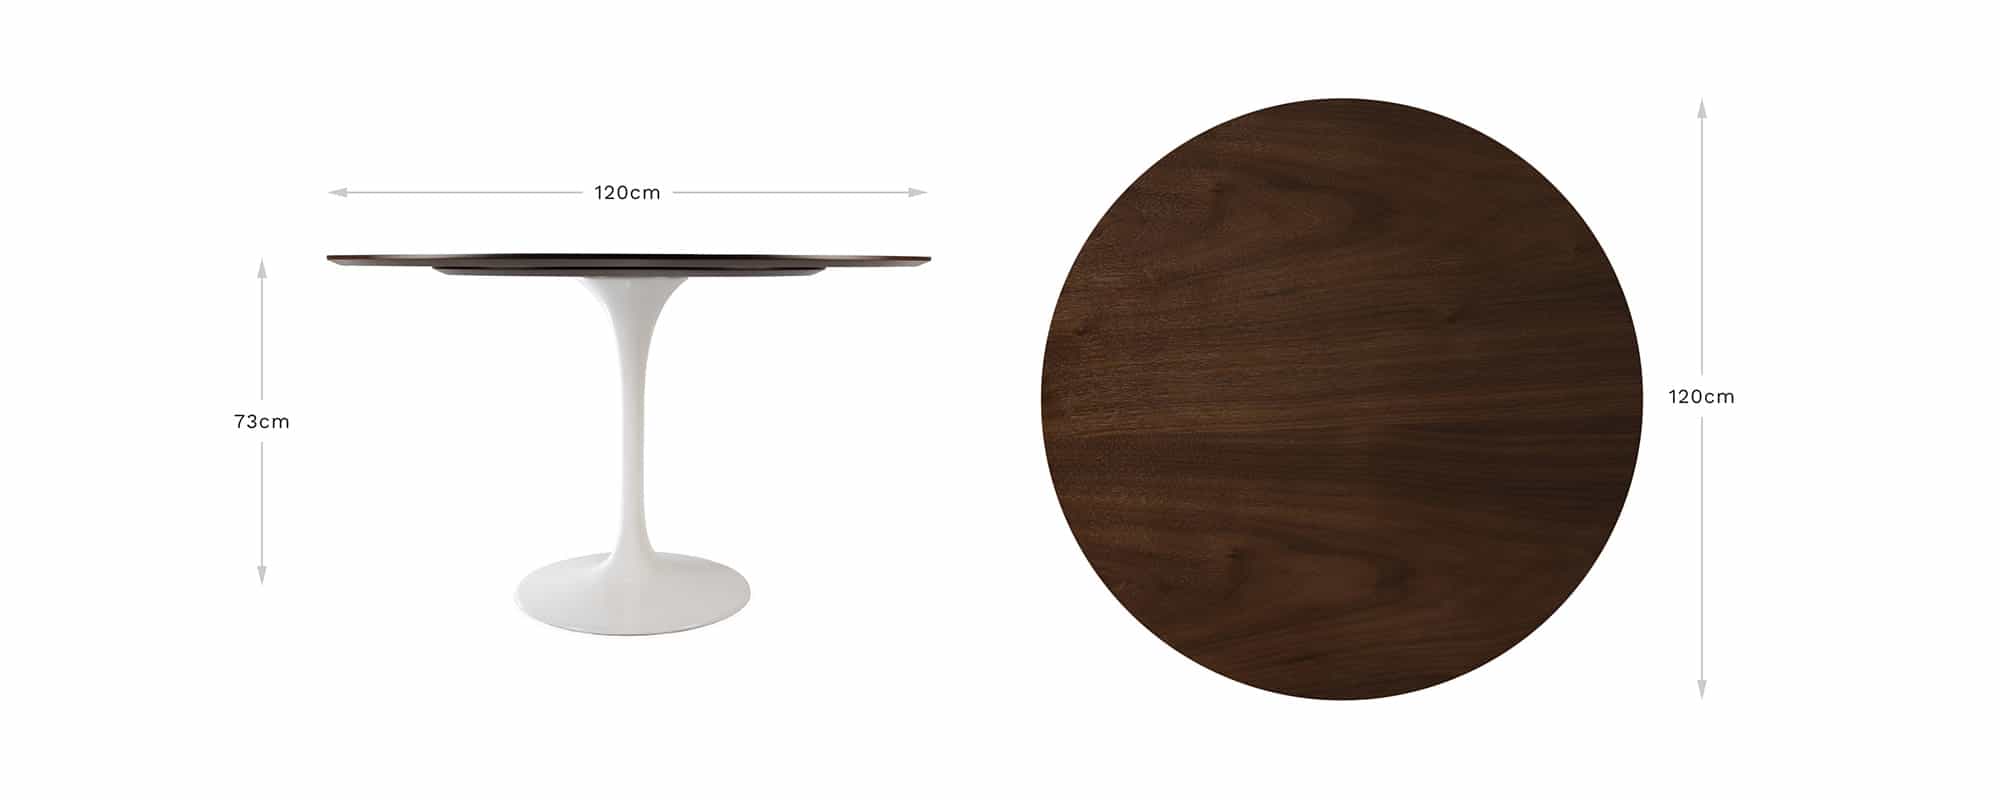 This banner image shows a top down and straight on view of the 120 cm Saarinen Tulip Table and provides visual dimensions for the product